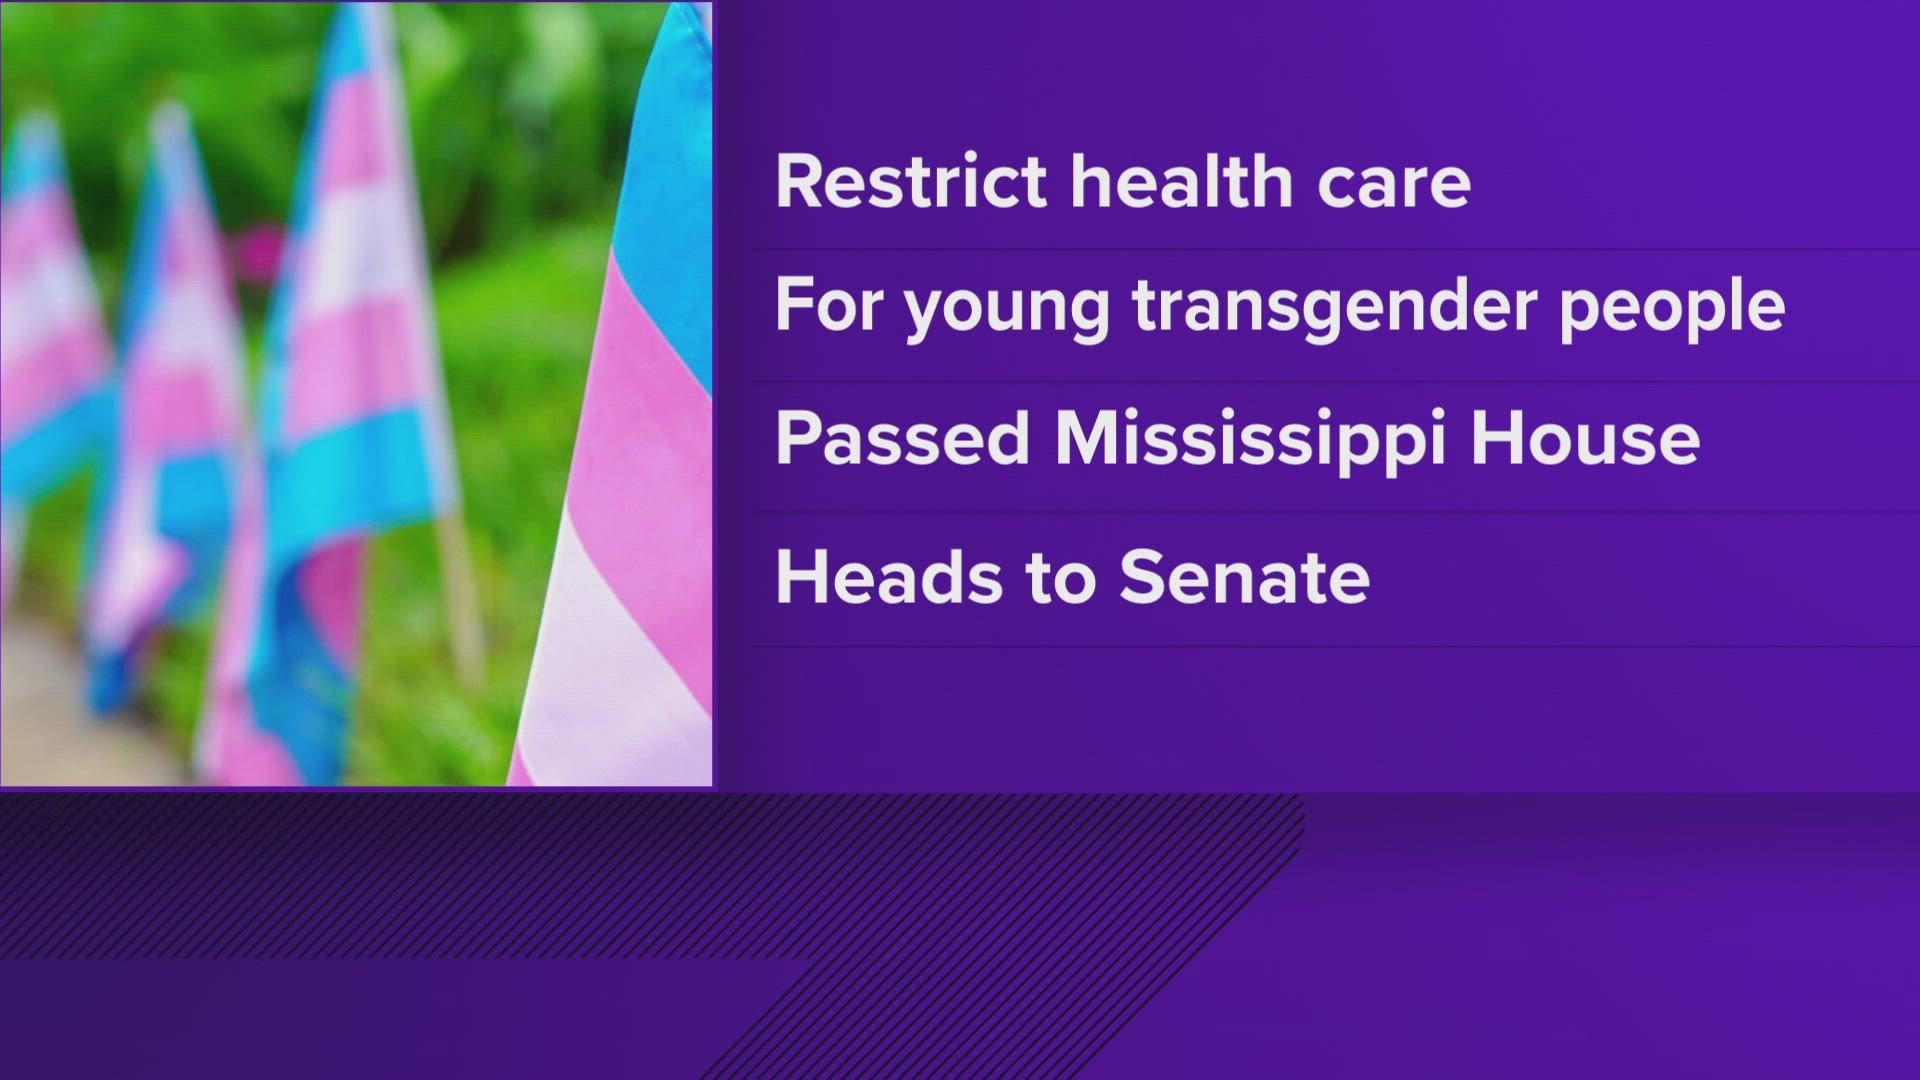 Mississippi joins about a dozen other conservative states in trying to restrict health care access for young transgender people.